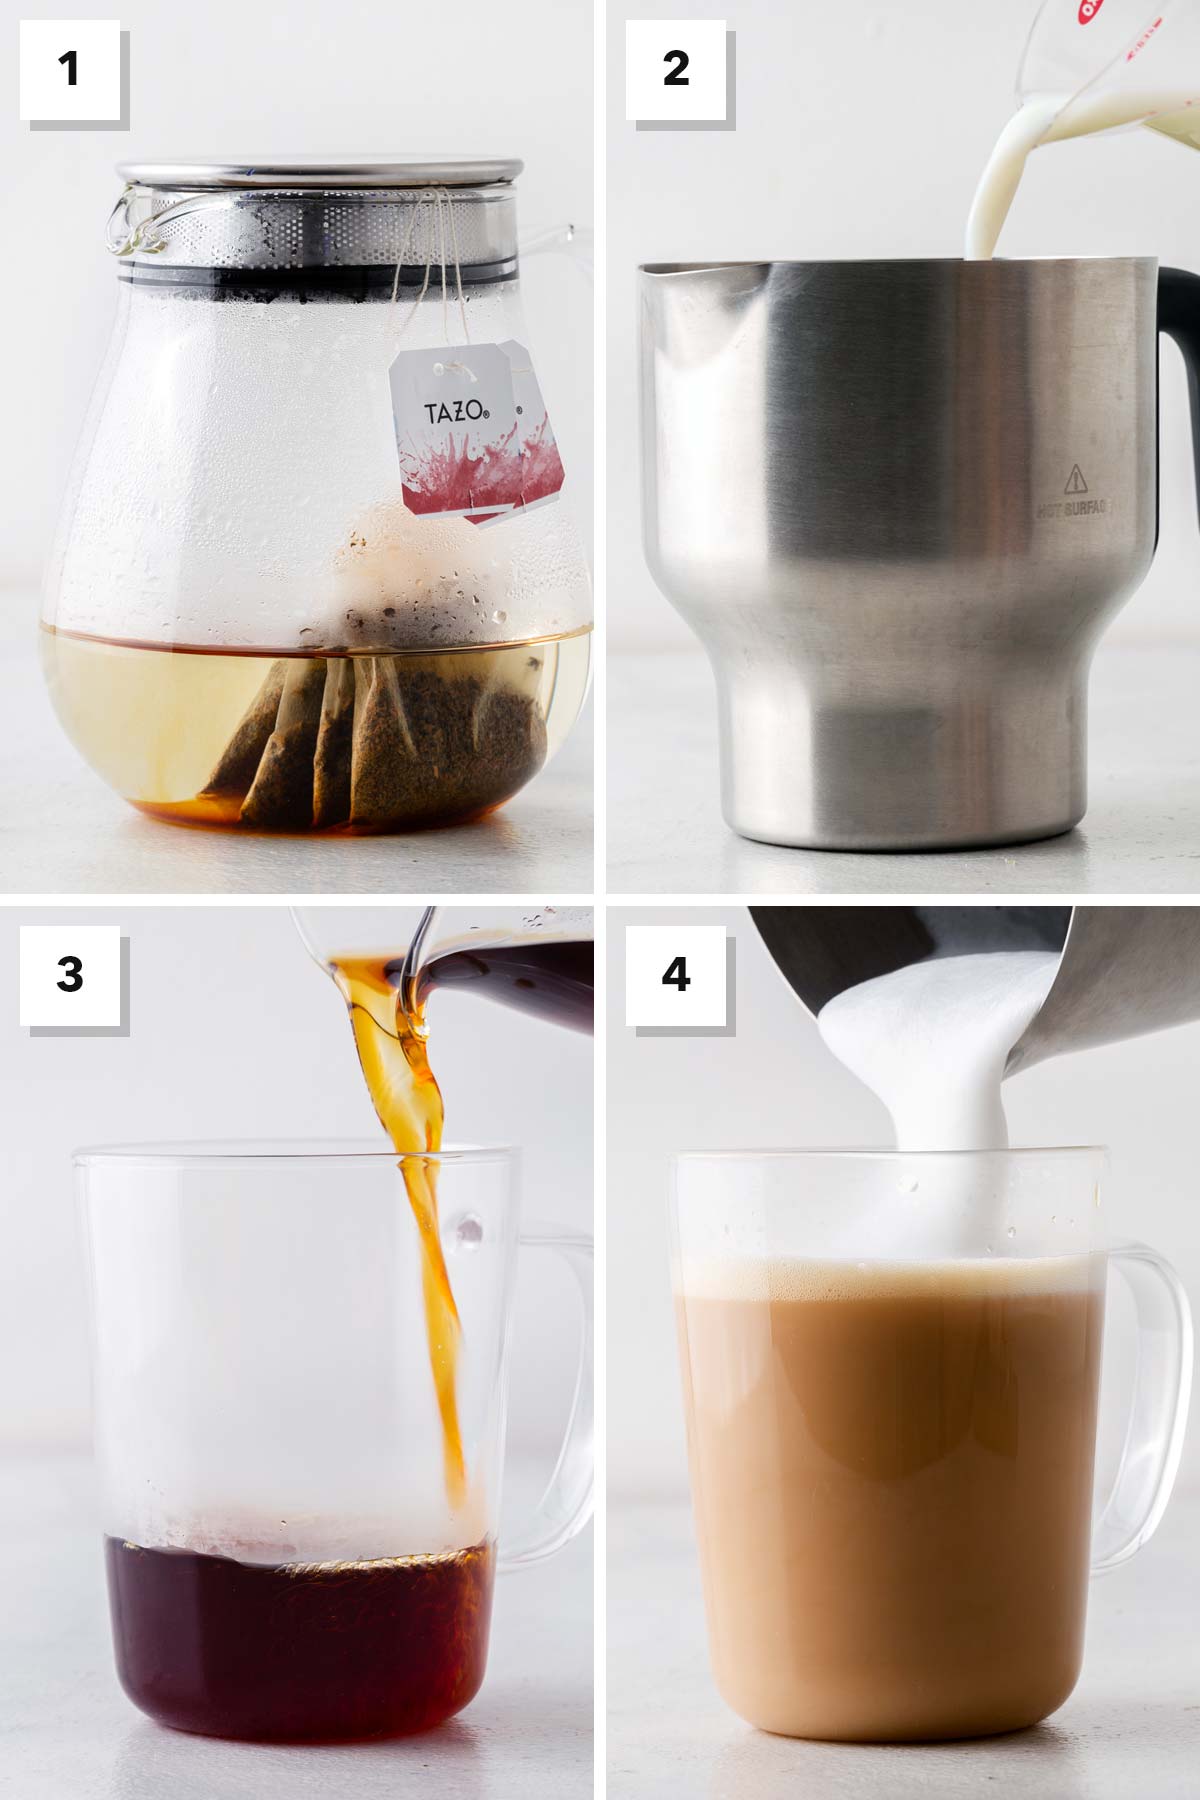 Starbucks Royal English Breakfast Tea Latte Copycat step-by-step directions, in four steps.